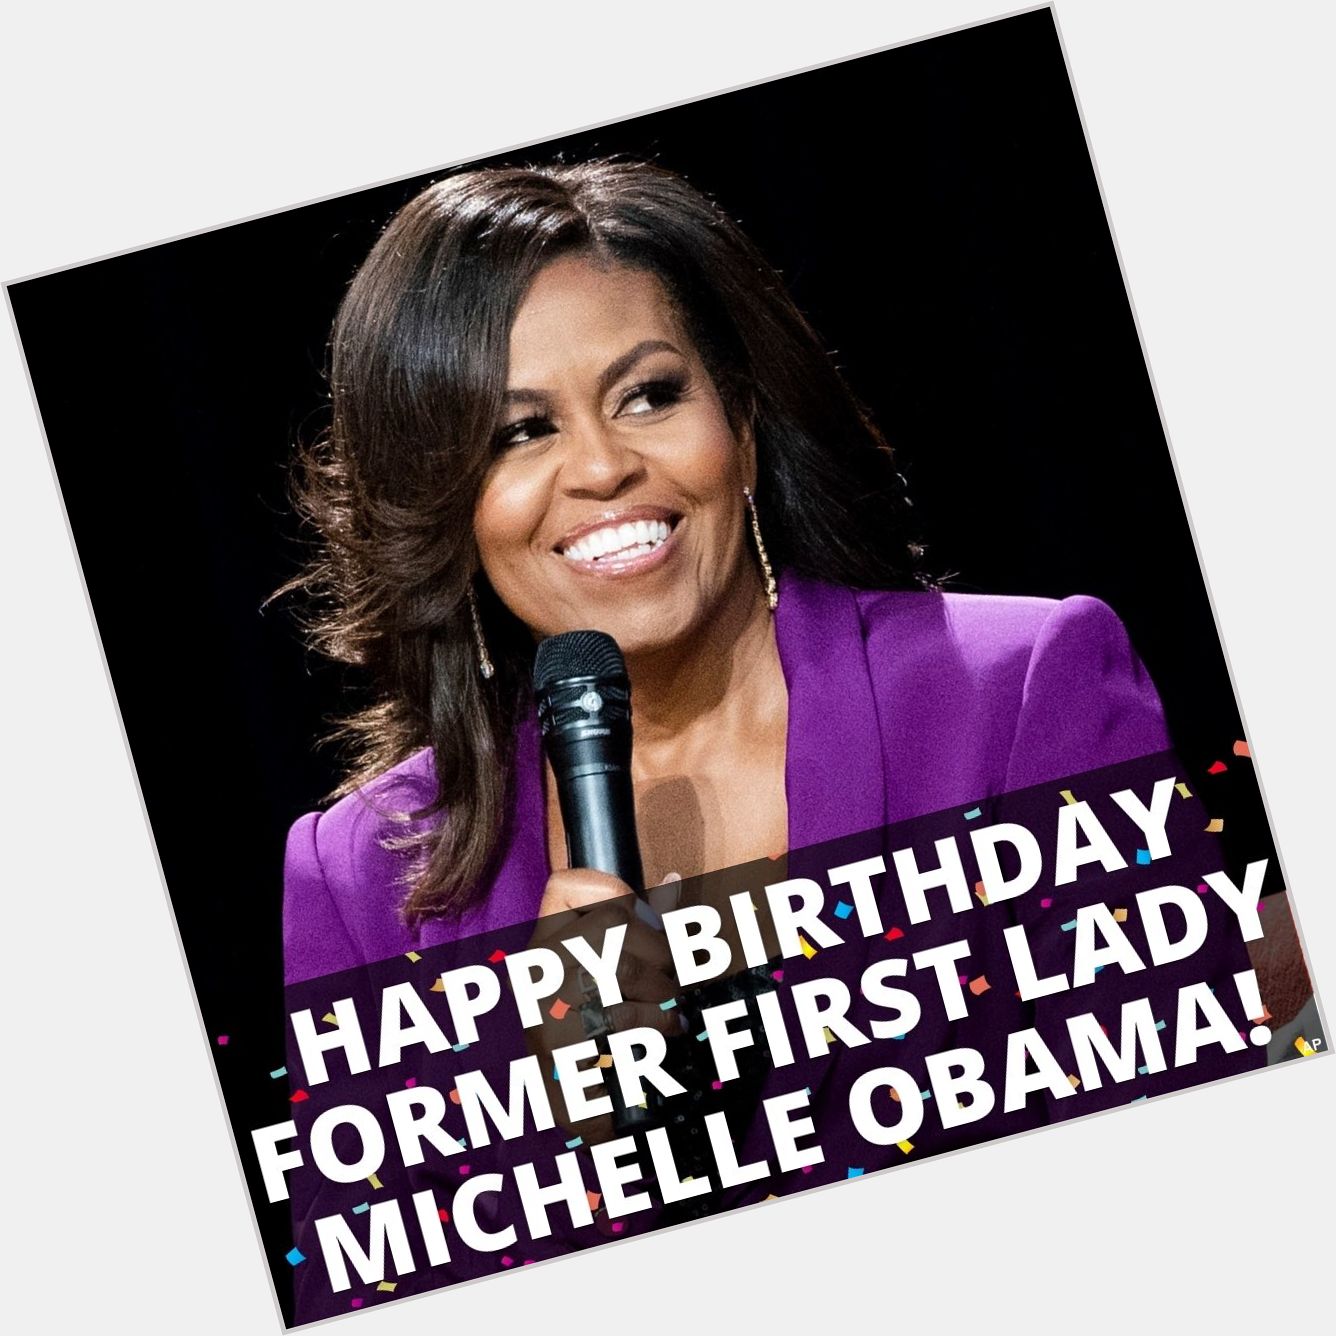 Happy Birthday Michelle Obama!

Today the former First Lady celebrates her 57th birthday. 